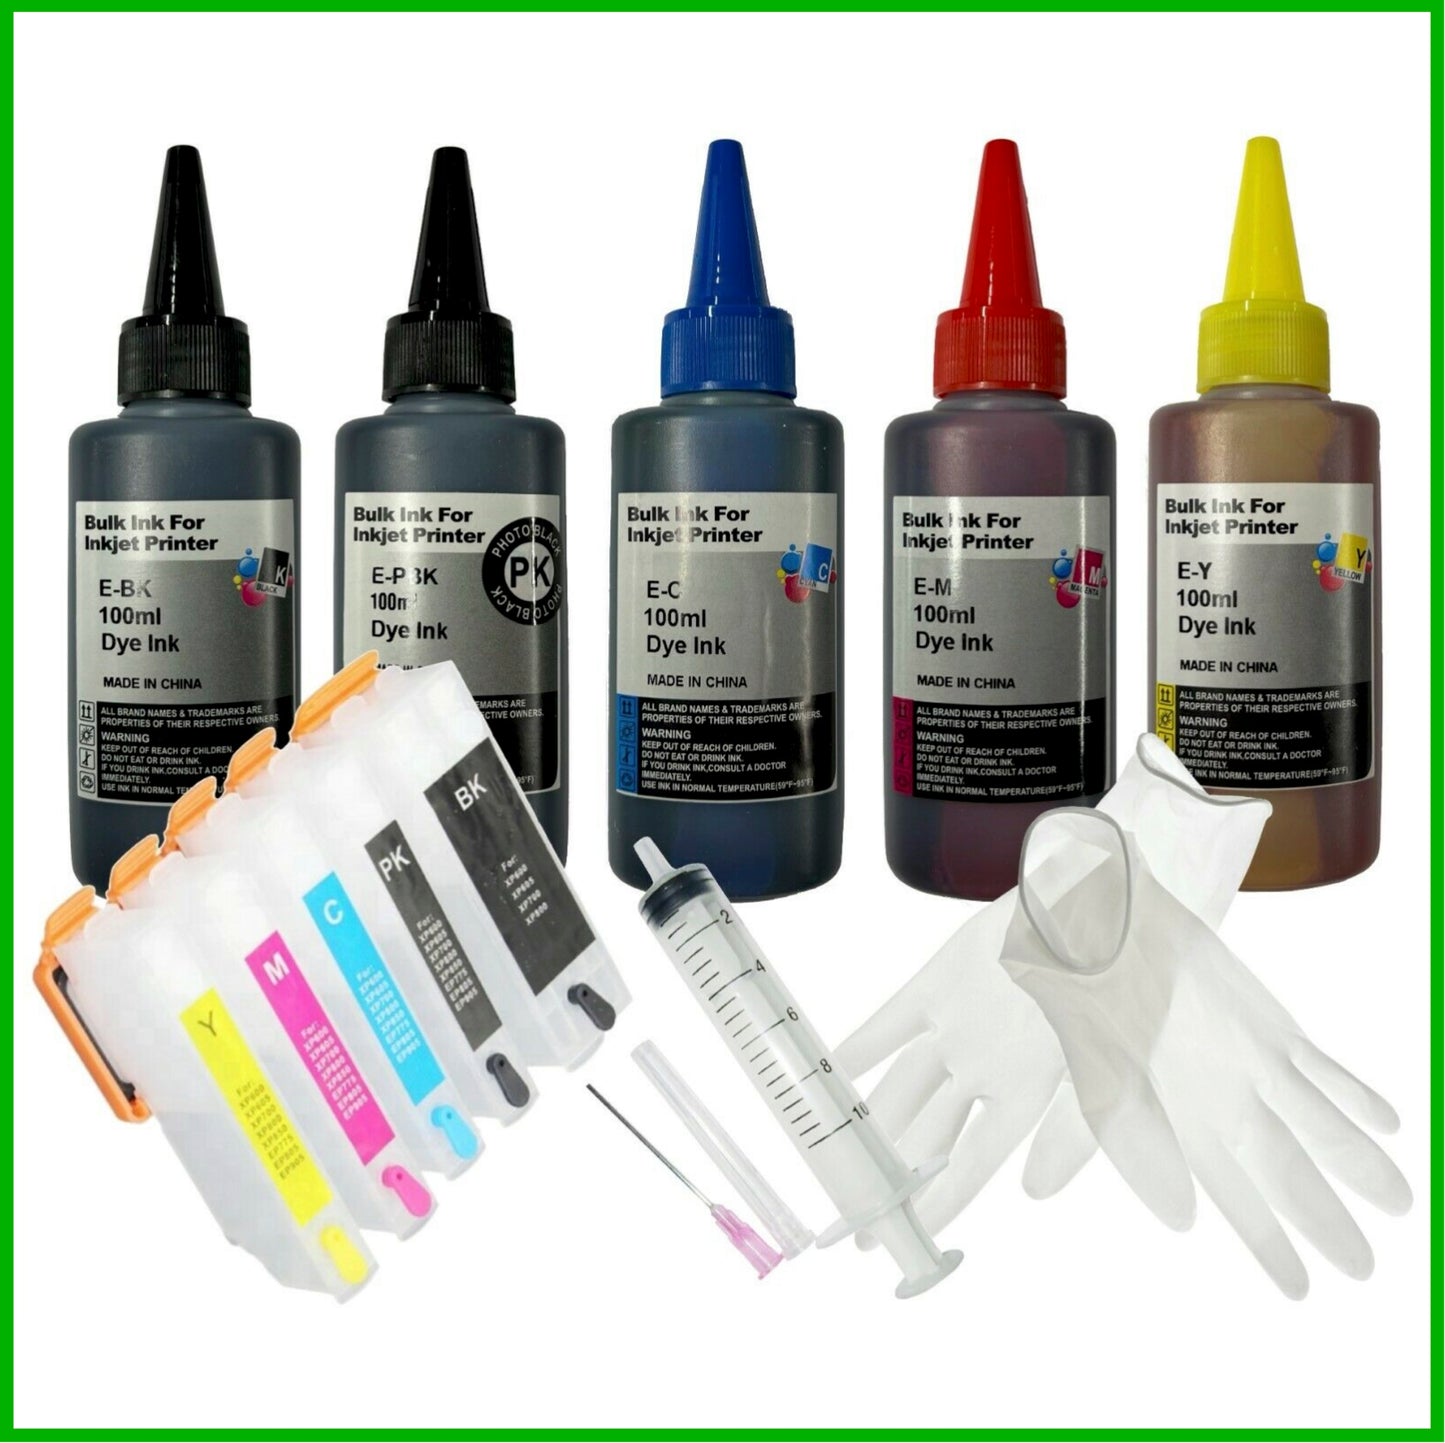 Refill Starter Kit - 26XL Cartridges with ARC Chip & Ink for Epson Expression Premium